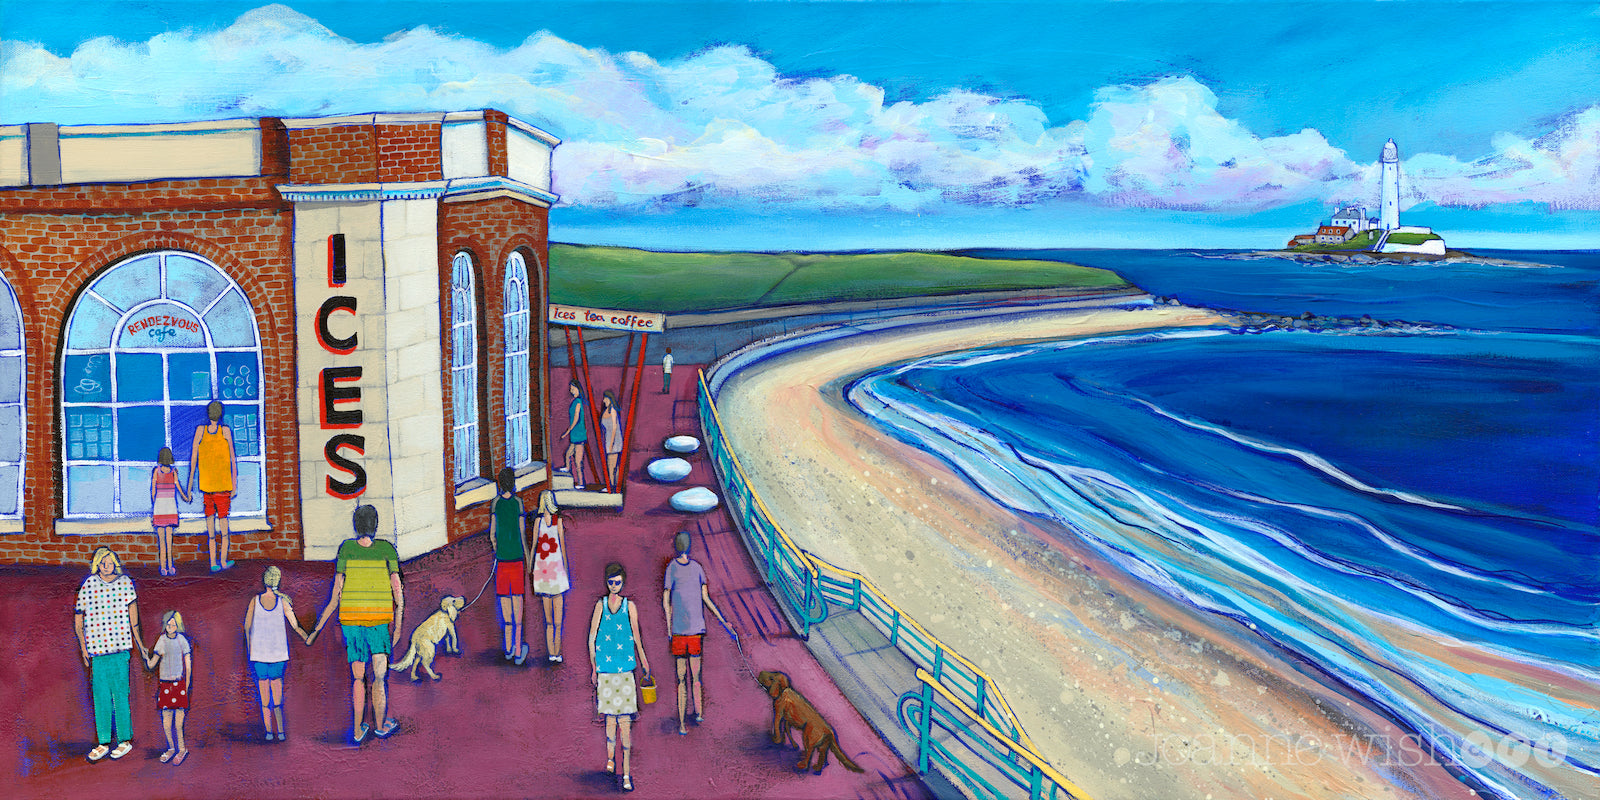 A colourful summery painting of the Rendezvous Cafe in Whitley Bay featuring the famous ICES typography painted on the wall.  St Mary's lighthouse is in the distance.